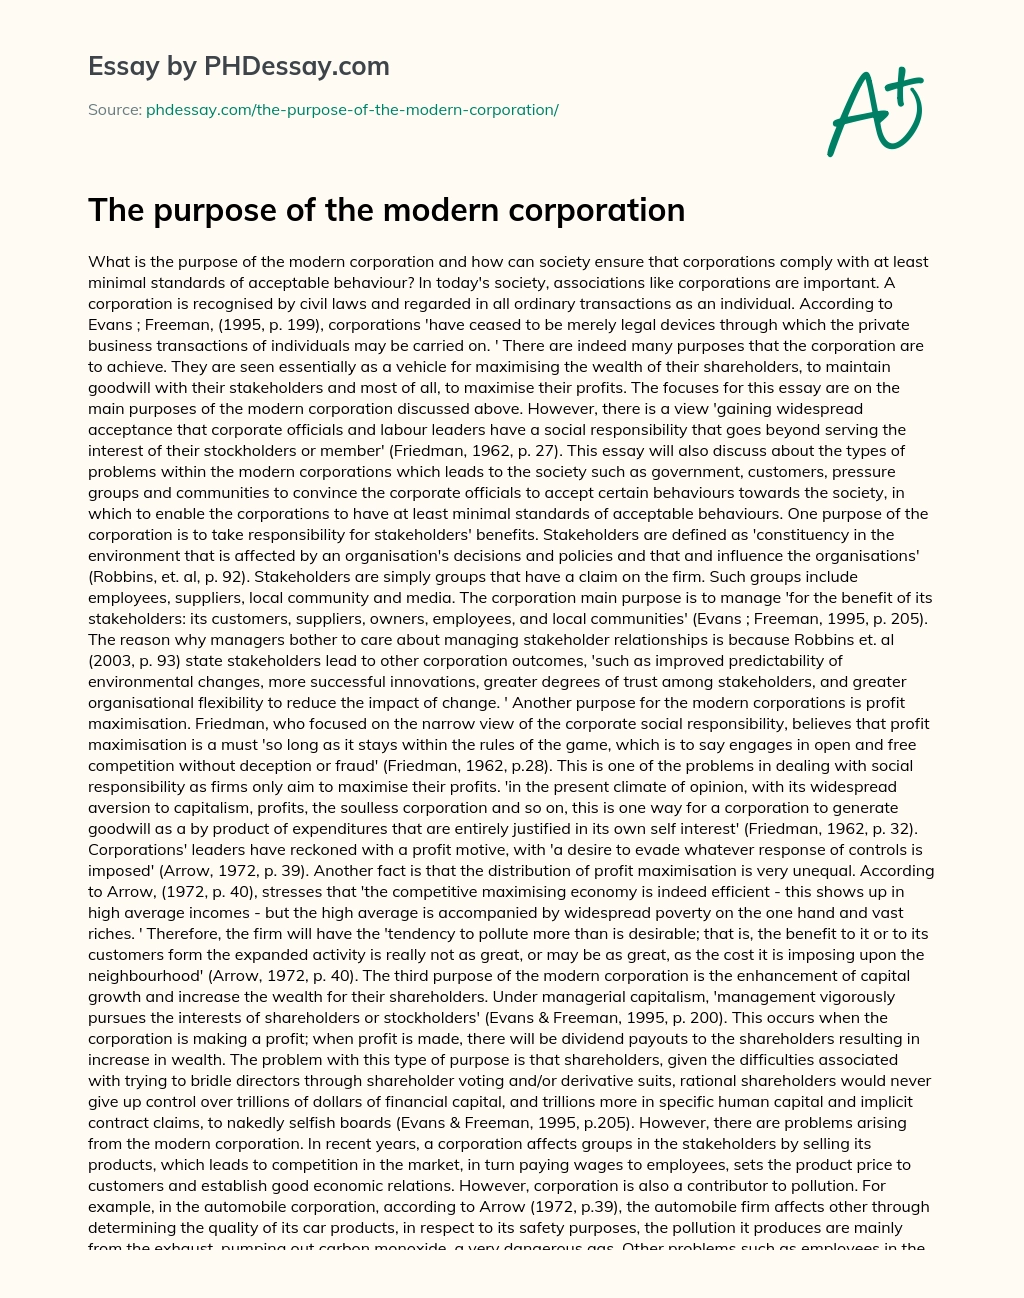 The purpose of the modern corporation essay